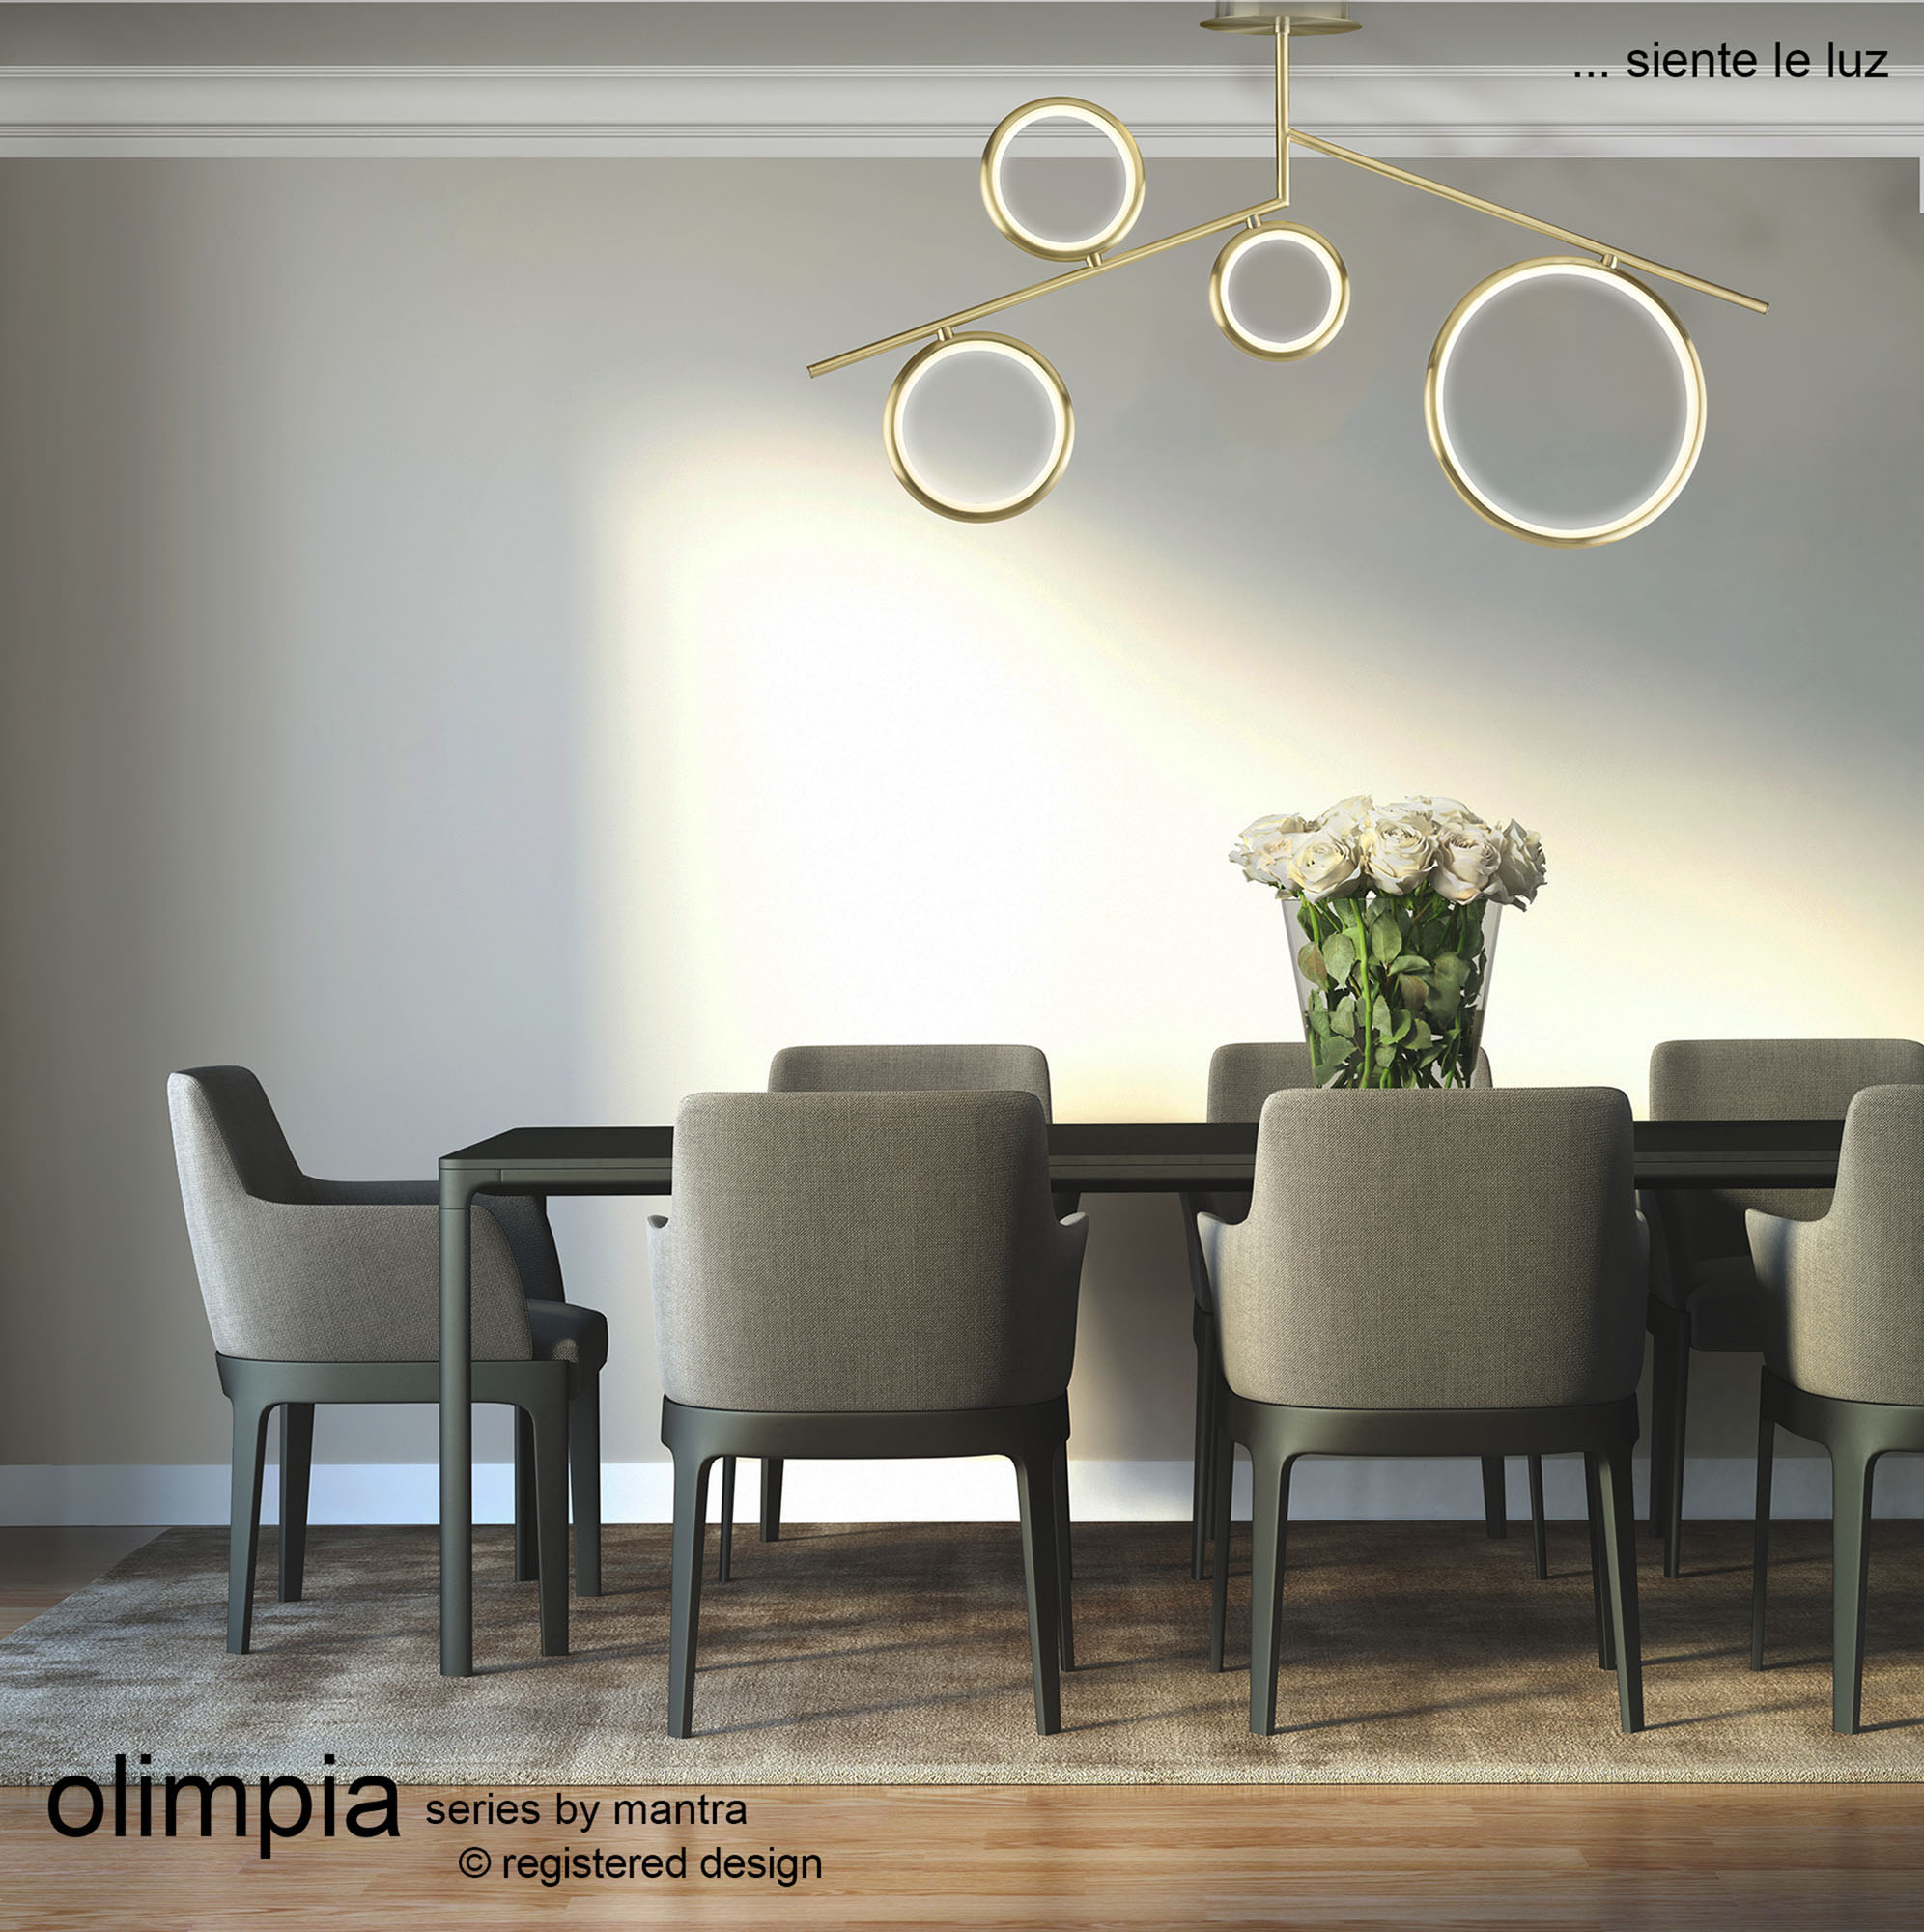 Olimpia SG Ceiling Lights Mantra Contemporary Ceiling Lights